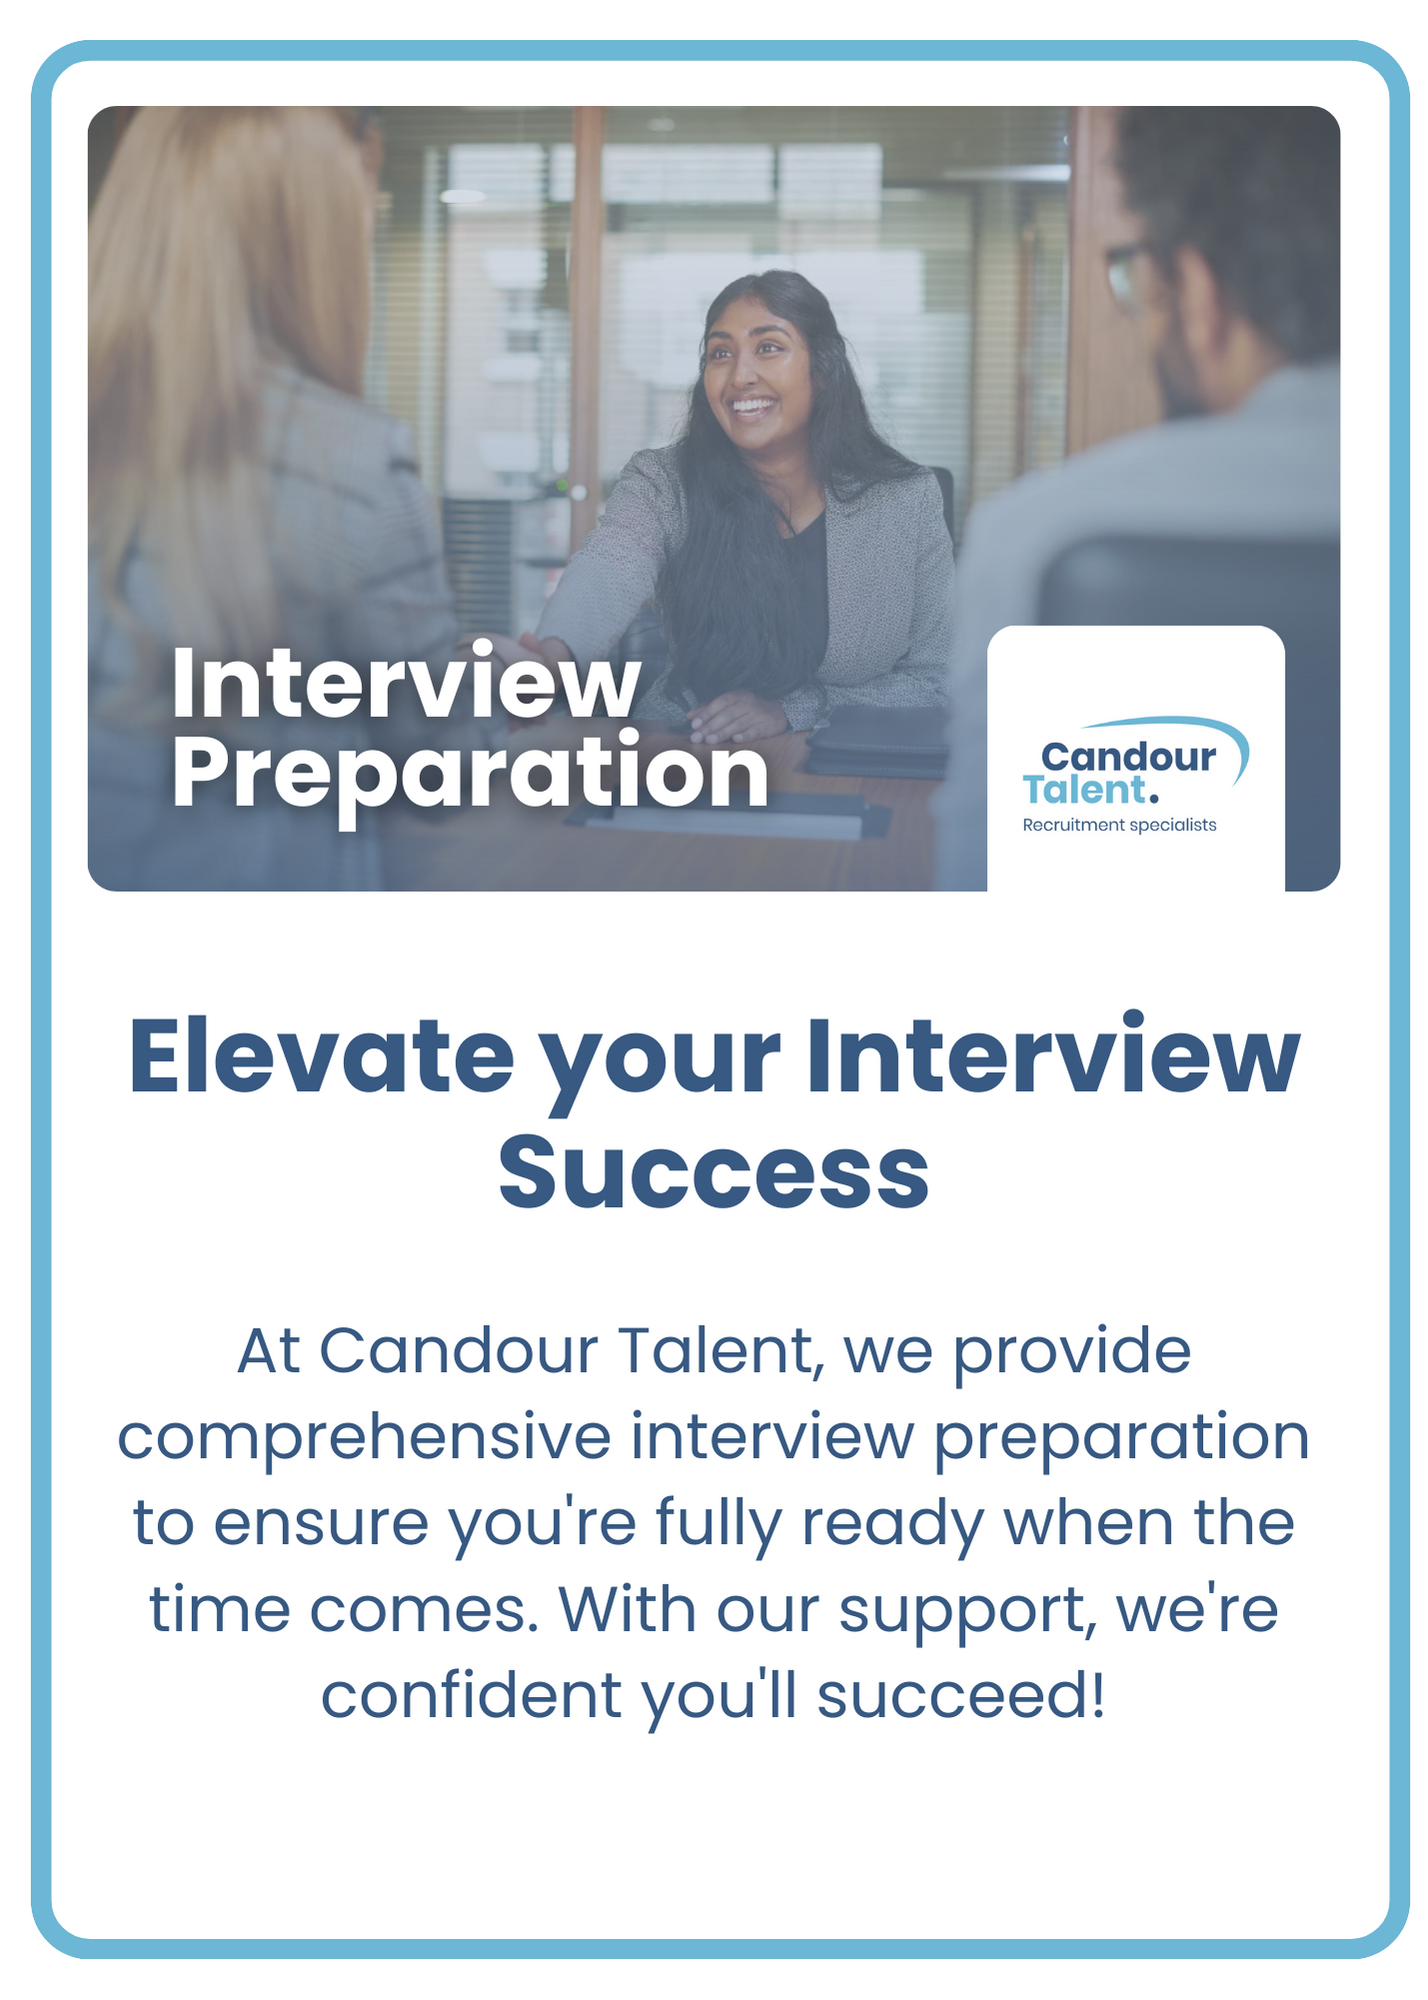 Candour Talent Recruitment Agency - Candidate Page. Image of 'Interview Preparation.' Person at interview stage presenting a handshake with employer. Elevate your Interview Success. At Candour Talent, we provide comprehensive interview preparation to ensure you're fully ready when the time comes. With our support, we're confident you'll succeed